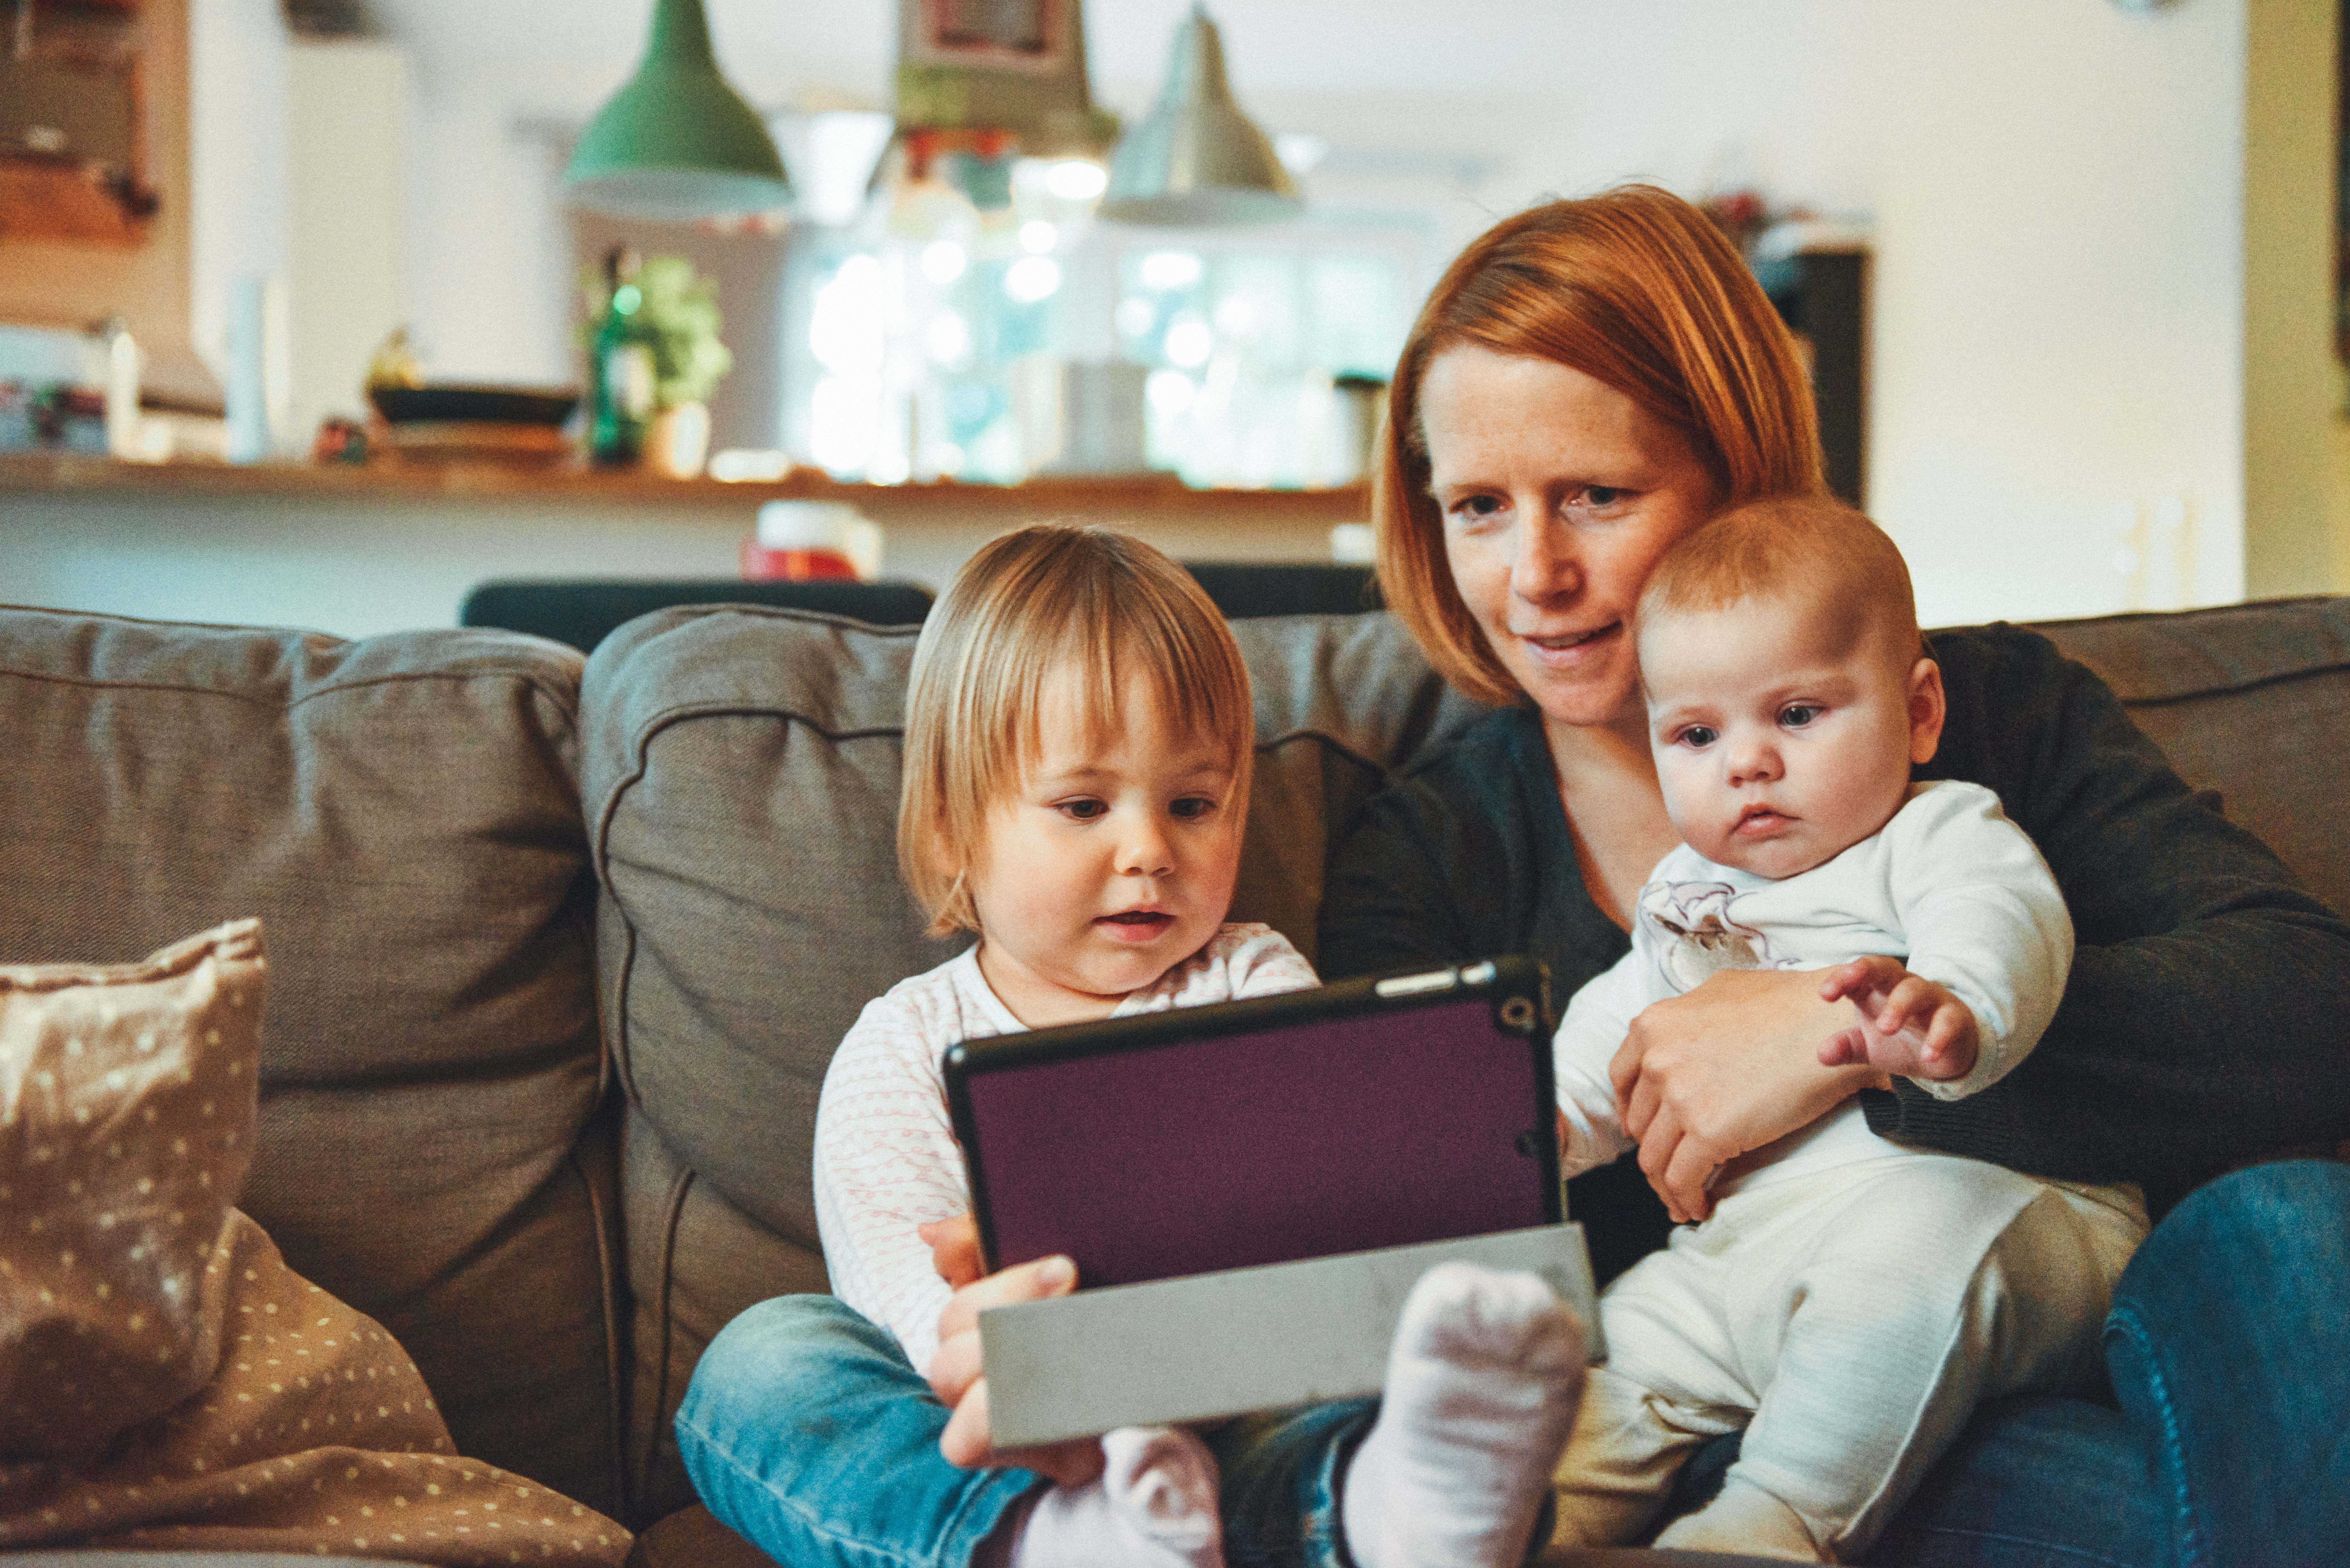 Blonde woman holding baby next to a toddler playing with a tablet.